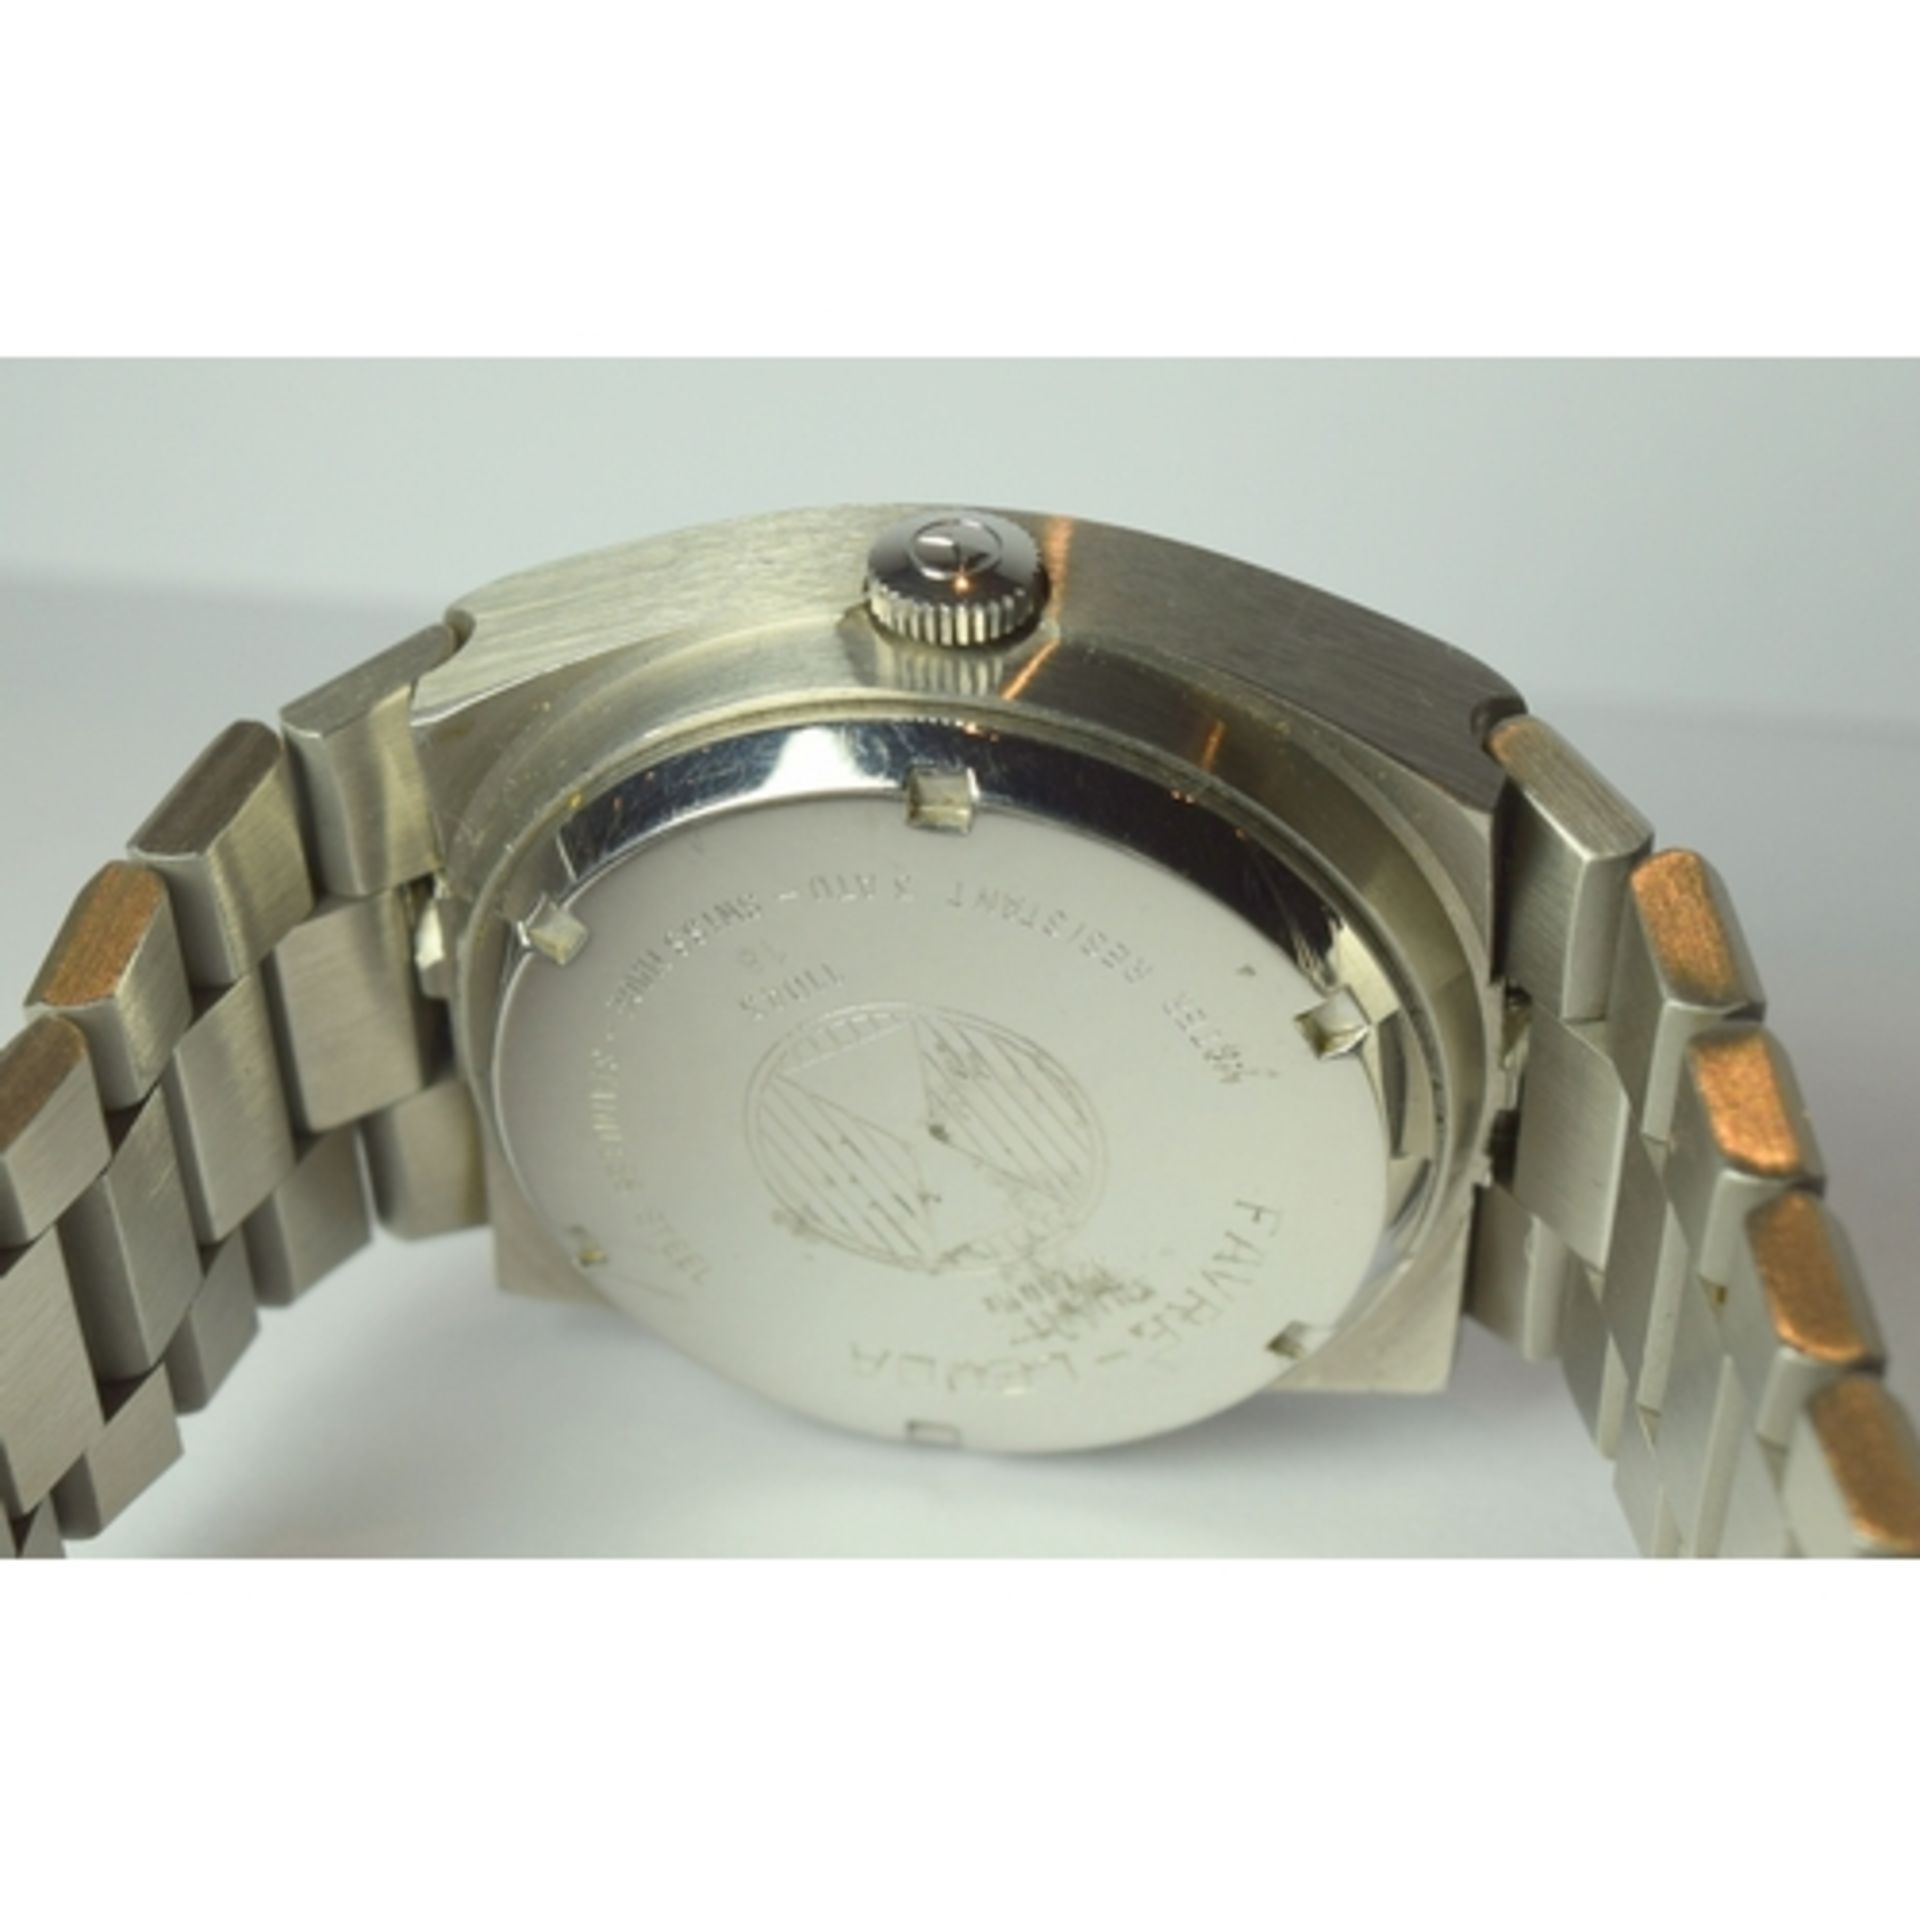 Rare Favre Leuba Quartz NOS in box and with tags and papers. - Image 5 of 6